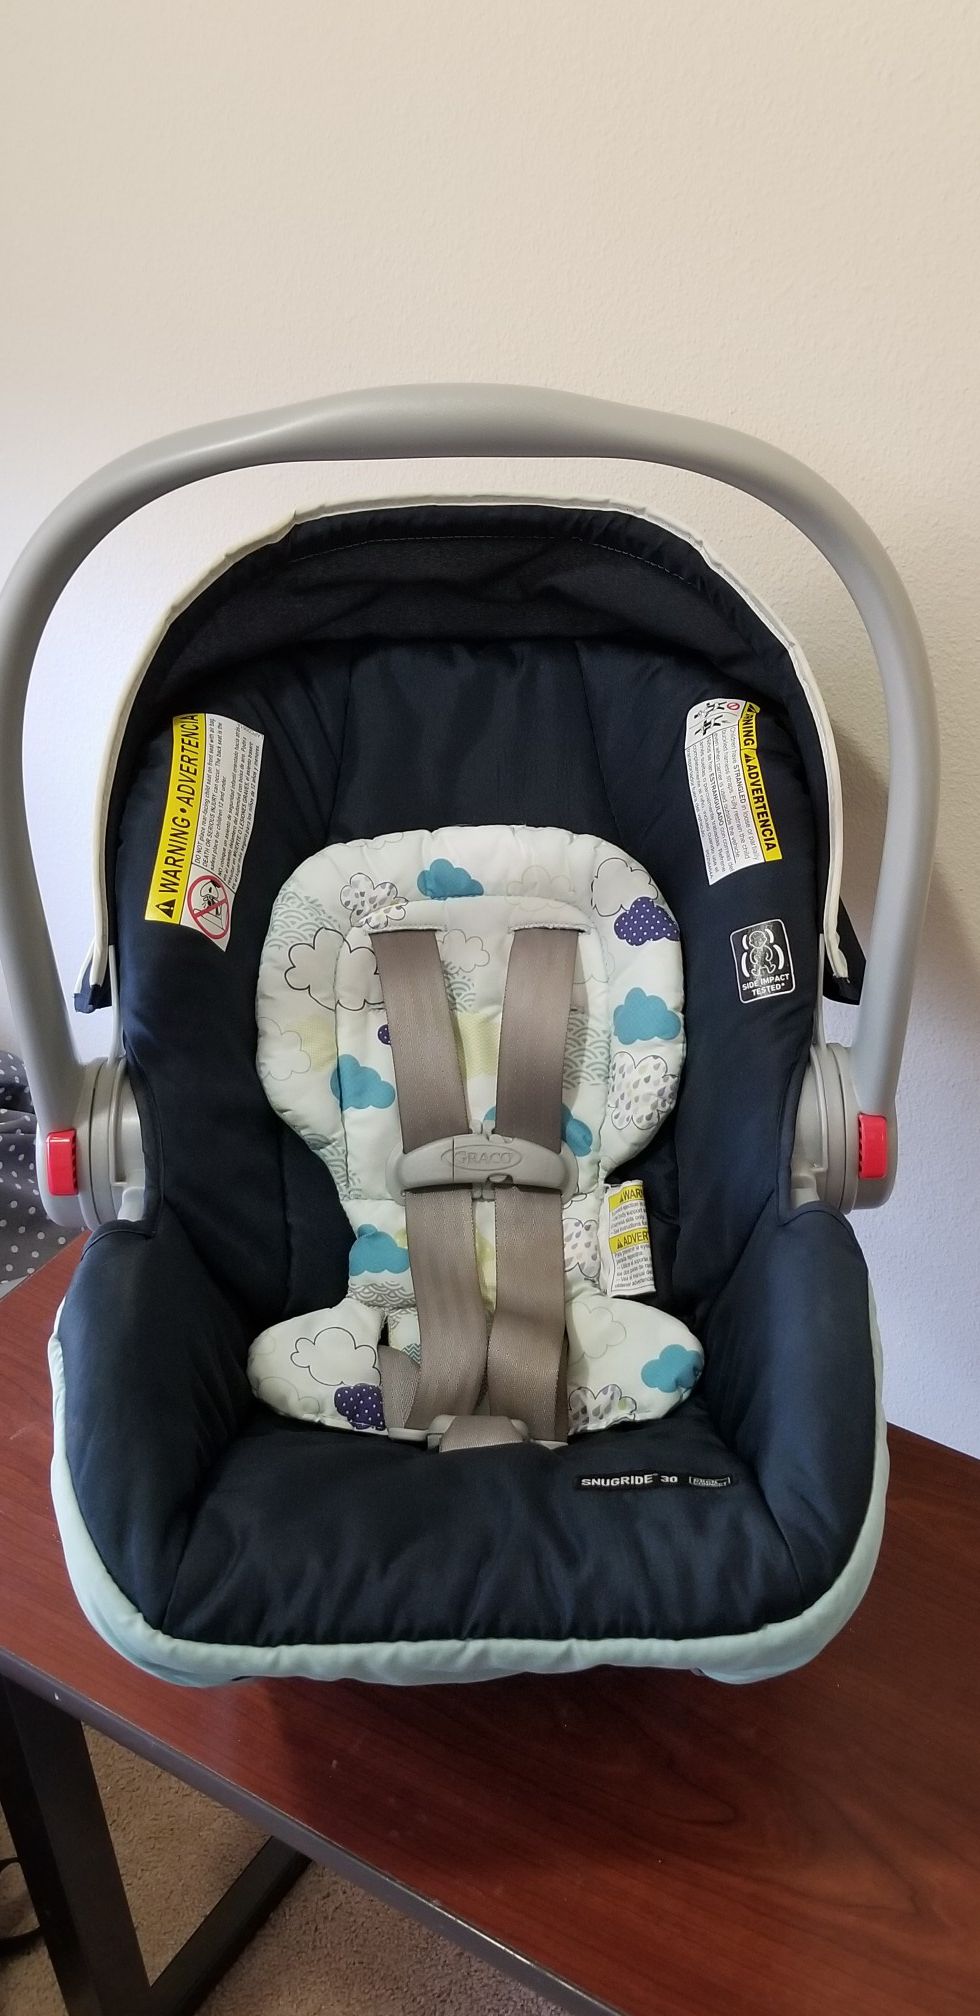 Graco baby Car seat, seat base with Stroller